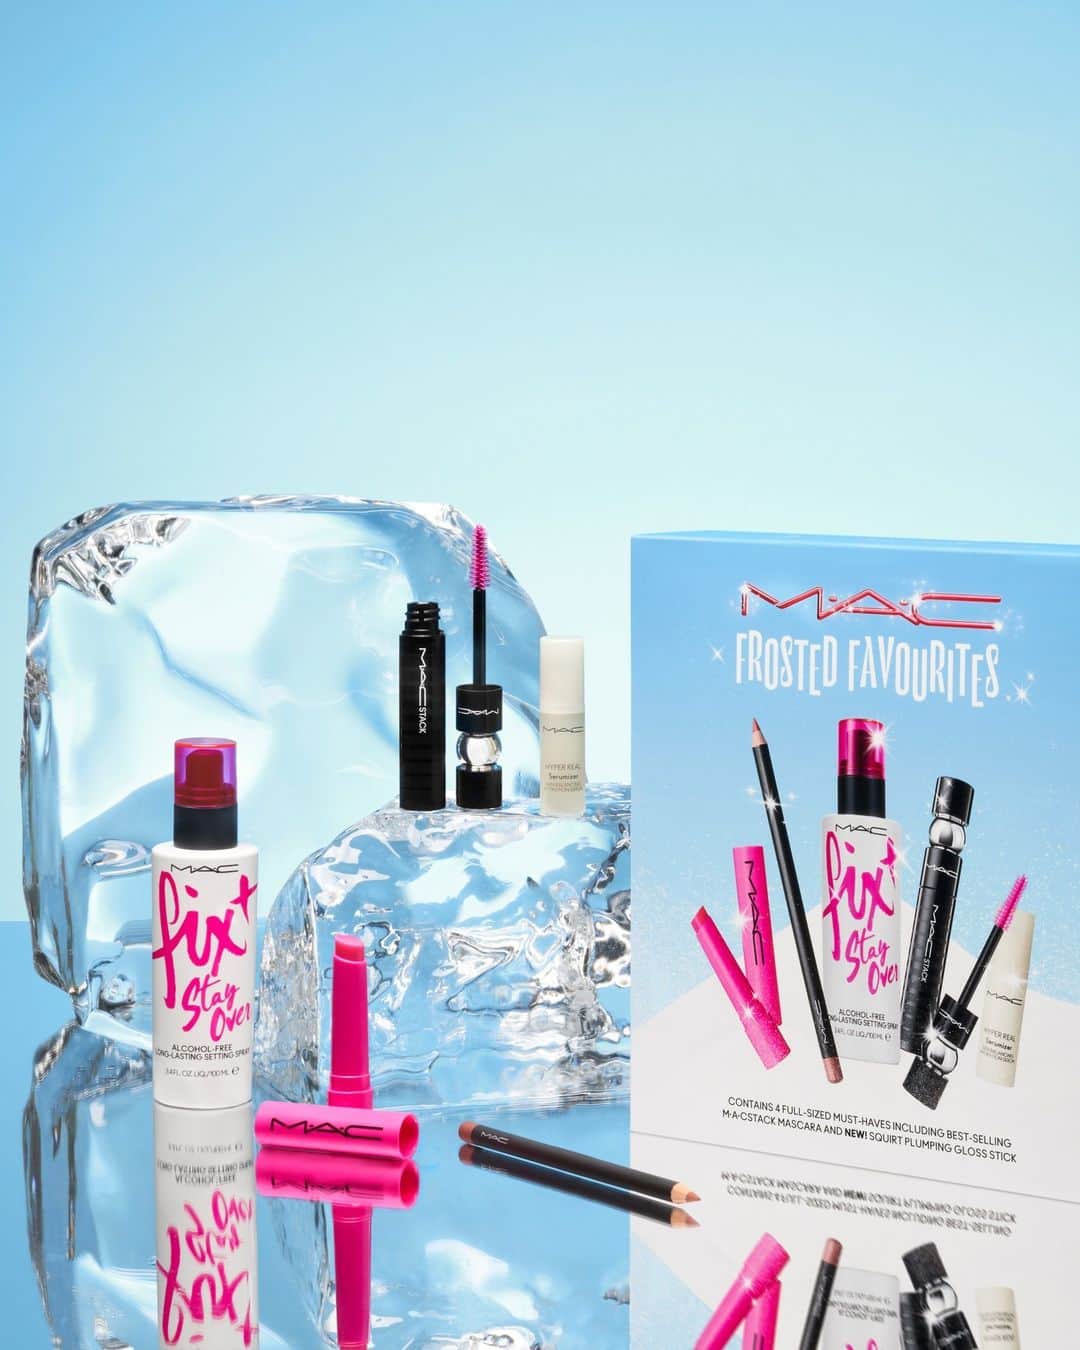 M·A·C Cosmetics UK & Irelandのインスタグラム：「These are a few of my favourite things 🎶  The @bootsuk STAR GIFT M•A•C Frosted Favourites Beauty Gift Set has arrived, but she may not be around for long! Worth £103, grab 5 best-selling products, all in this limited-edition gift set for ONLY £45!   💦 Fix+ Stay Over 🖤 M•A•CStack Mascara 💖 Squirt Plumping Gloss Stick in Amped 🌶️ Lip Pencil in Spice ☁️ Hyper Real Serumizer™ (mini)  Available only at @bootsuk ❄️  #MACCosmeticsUK #MACBootsStarGift #FrostedFavourites」